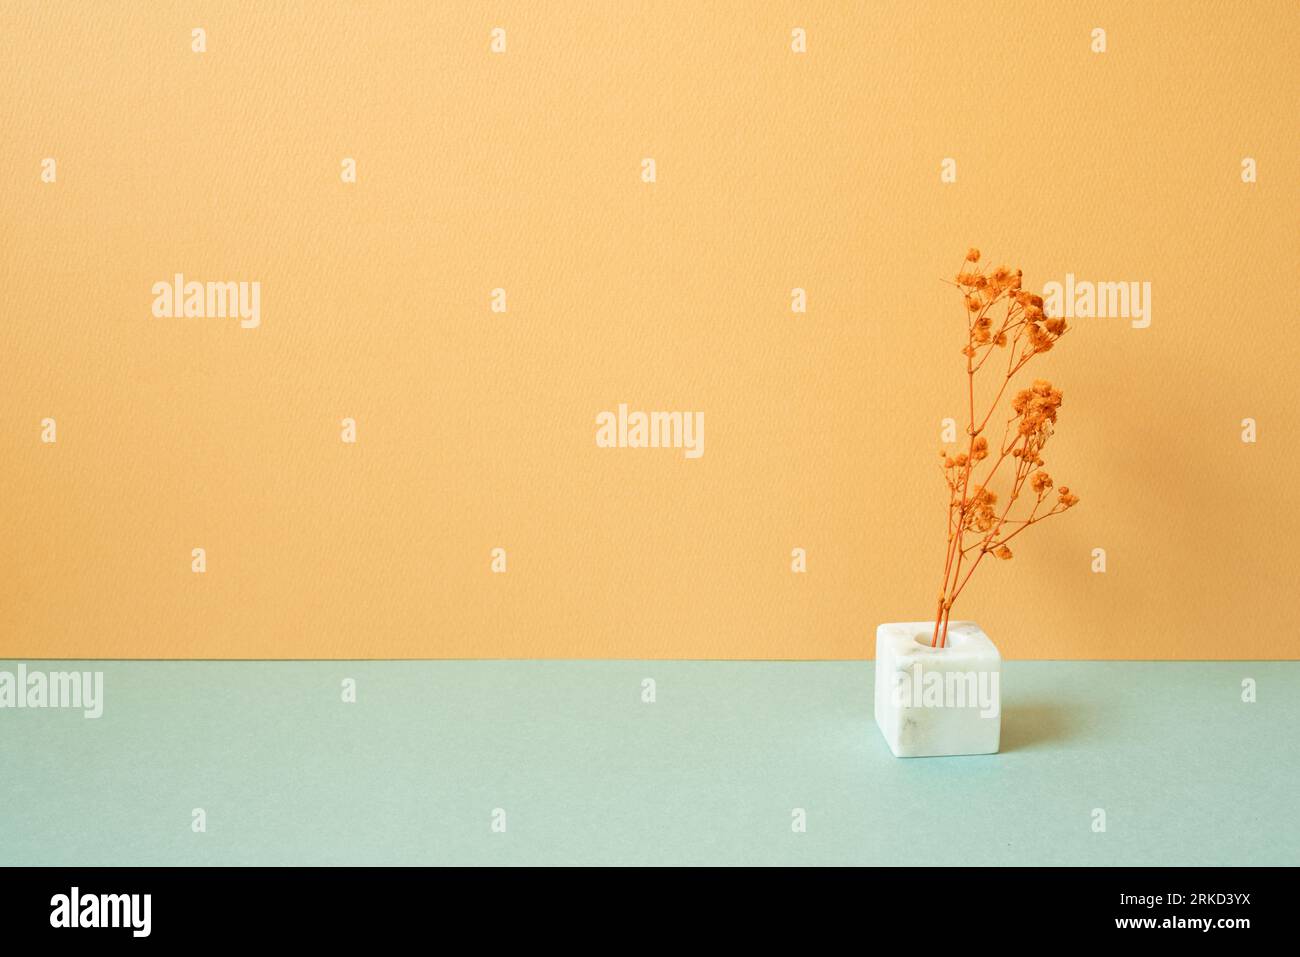 Vase of dry gypsophila flower on mint green table. orange wall background. copy space Stock Photo